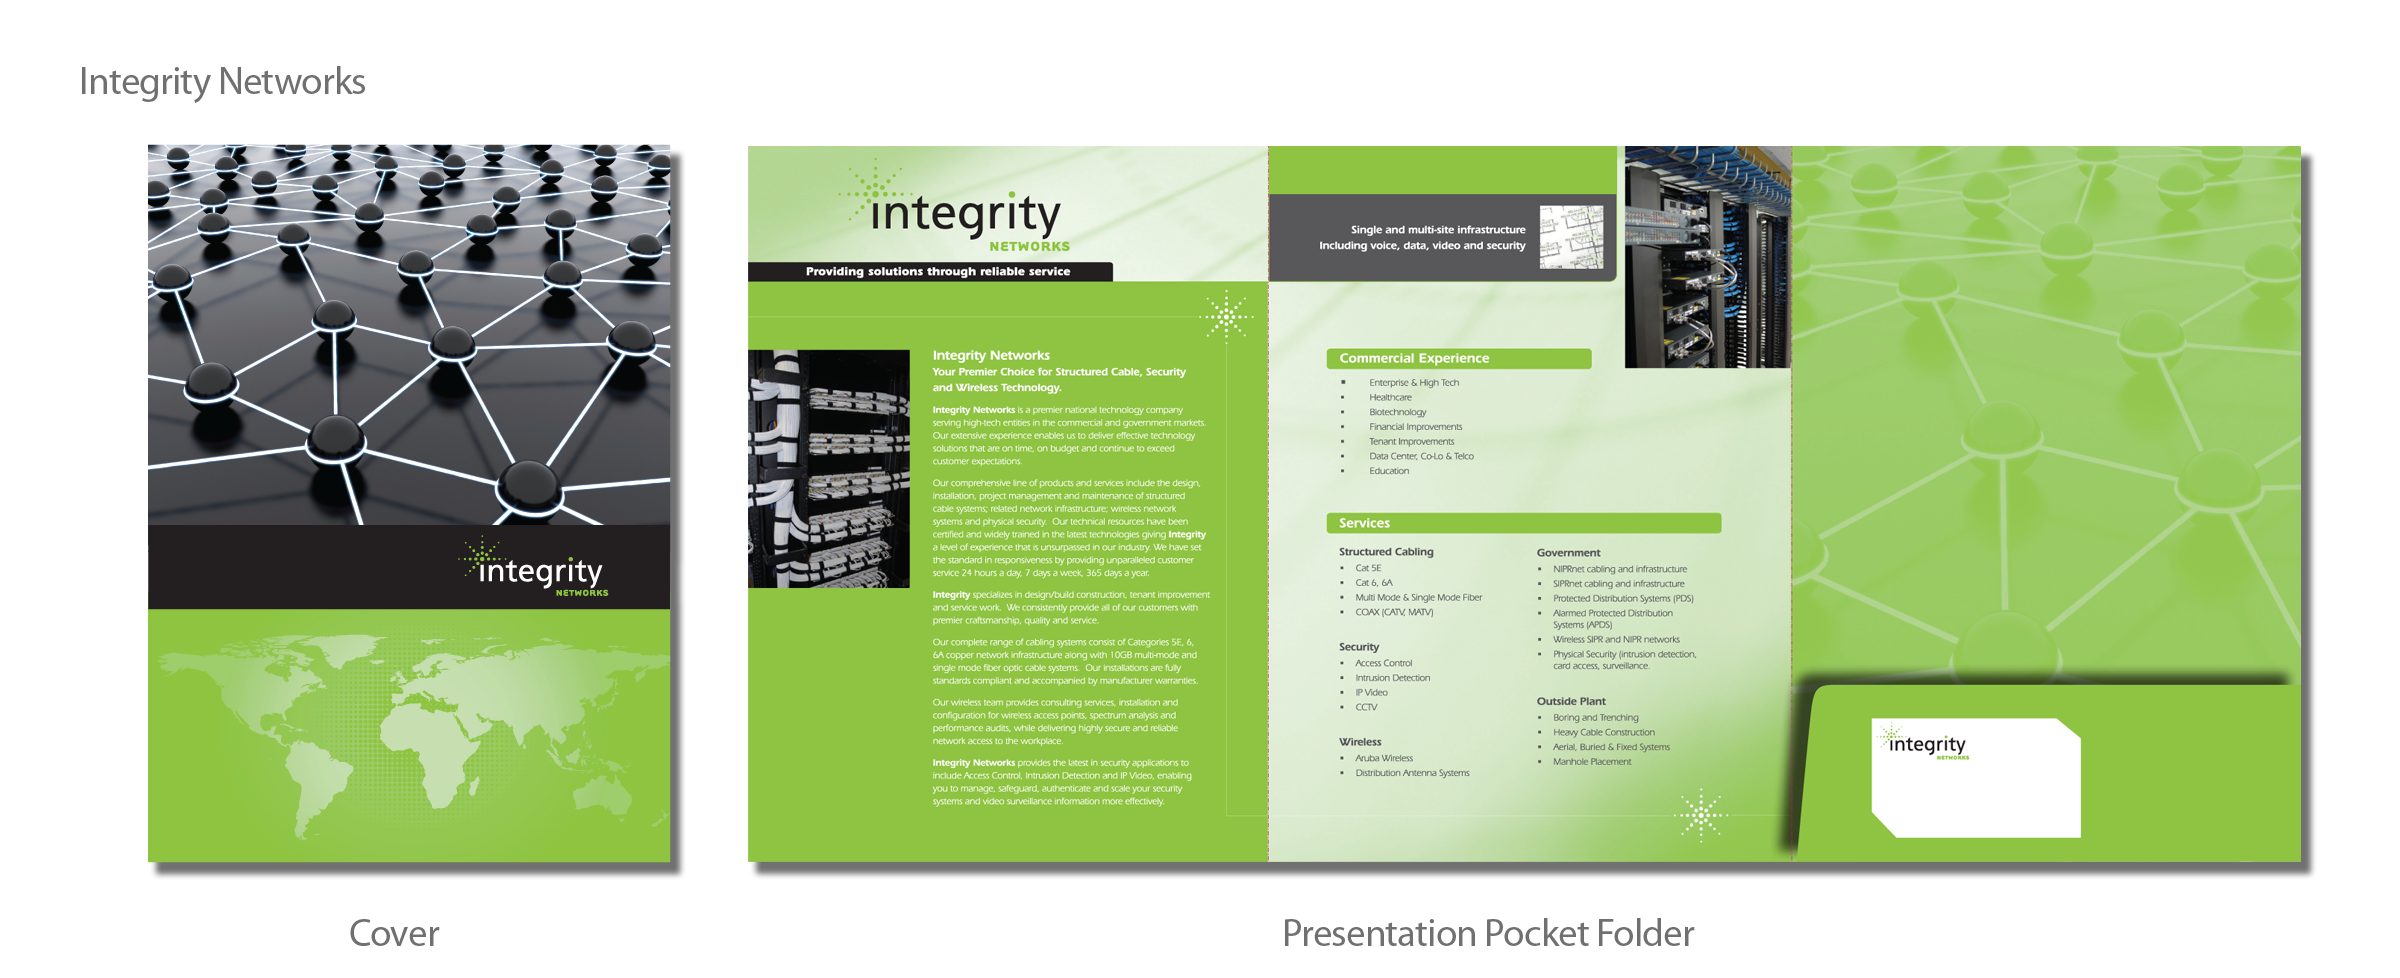  integrity samples